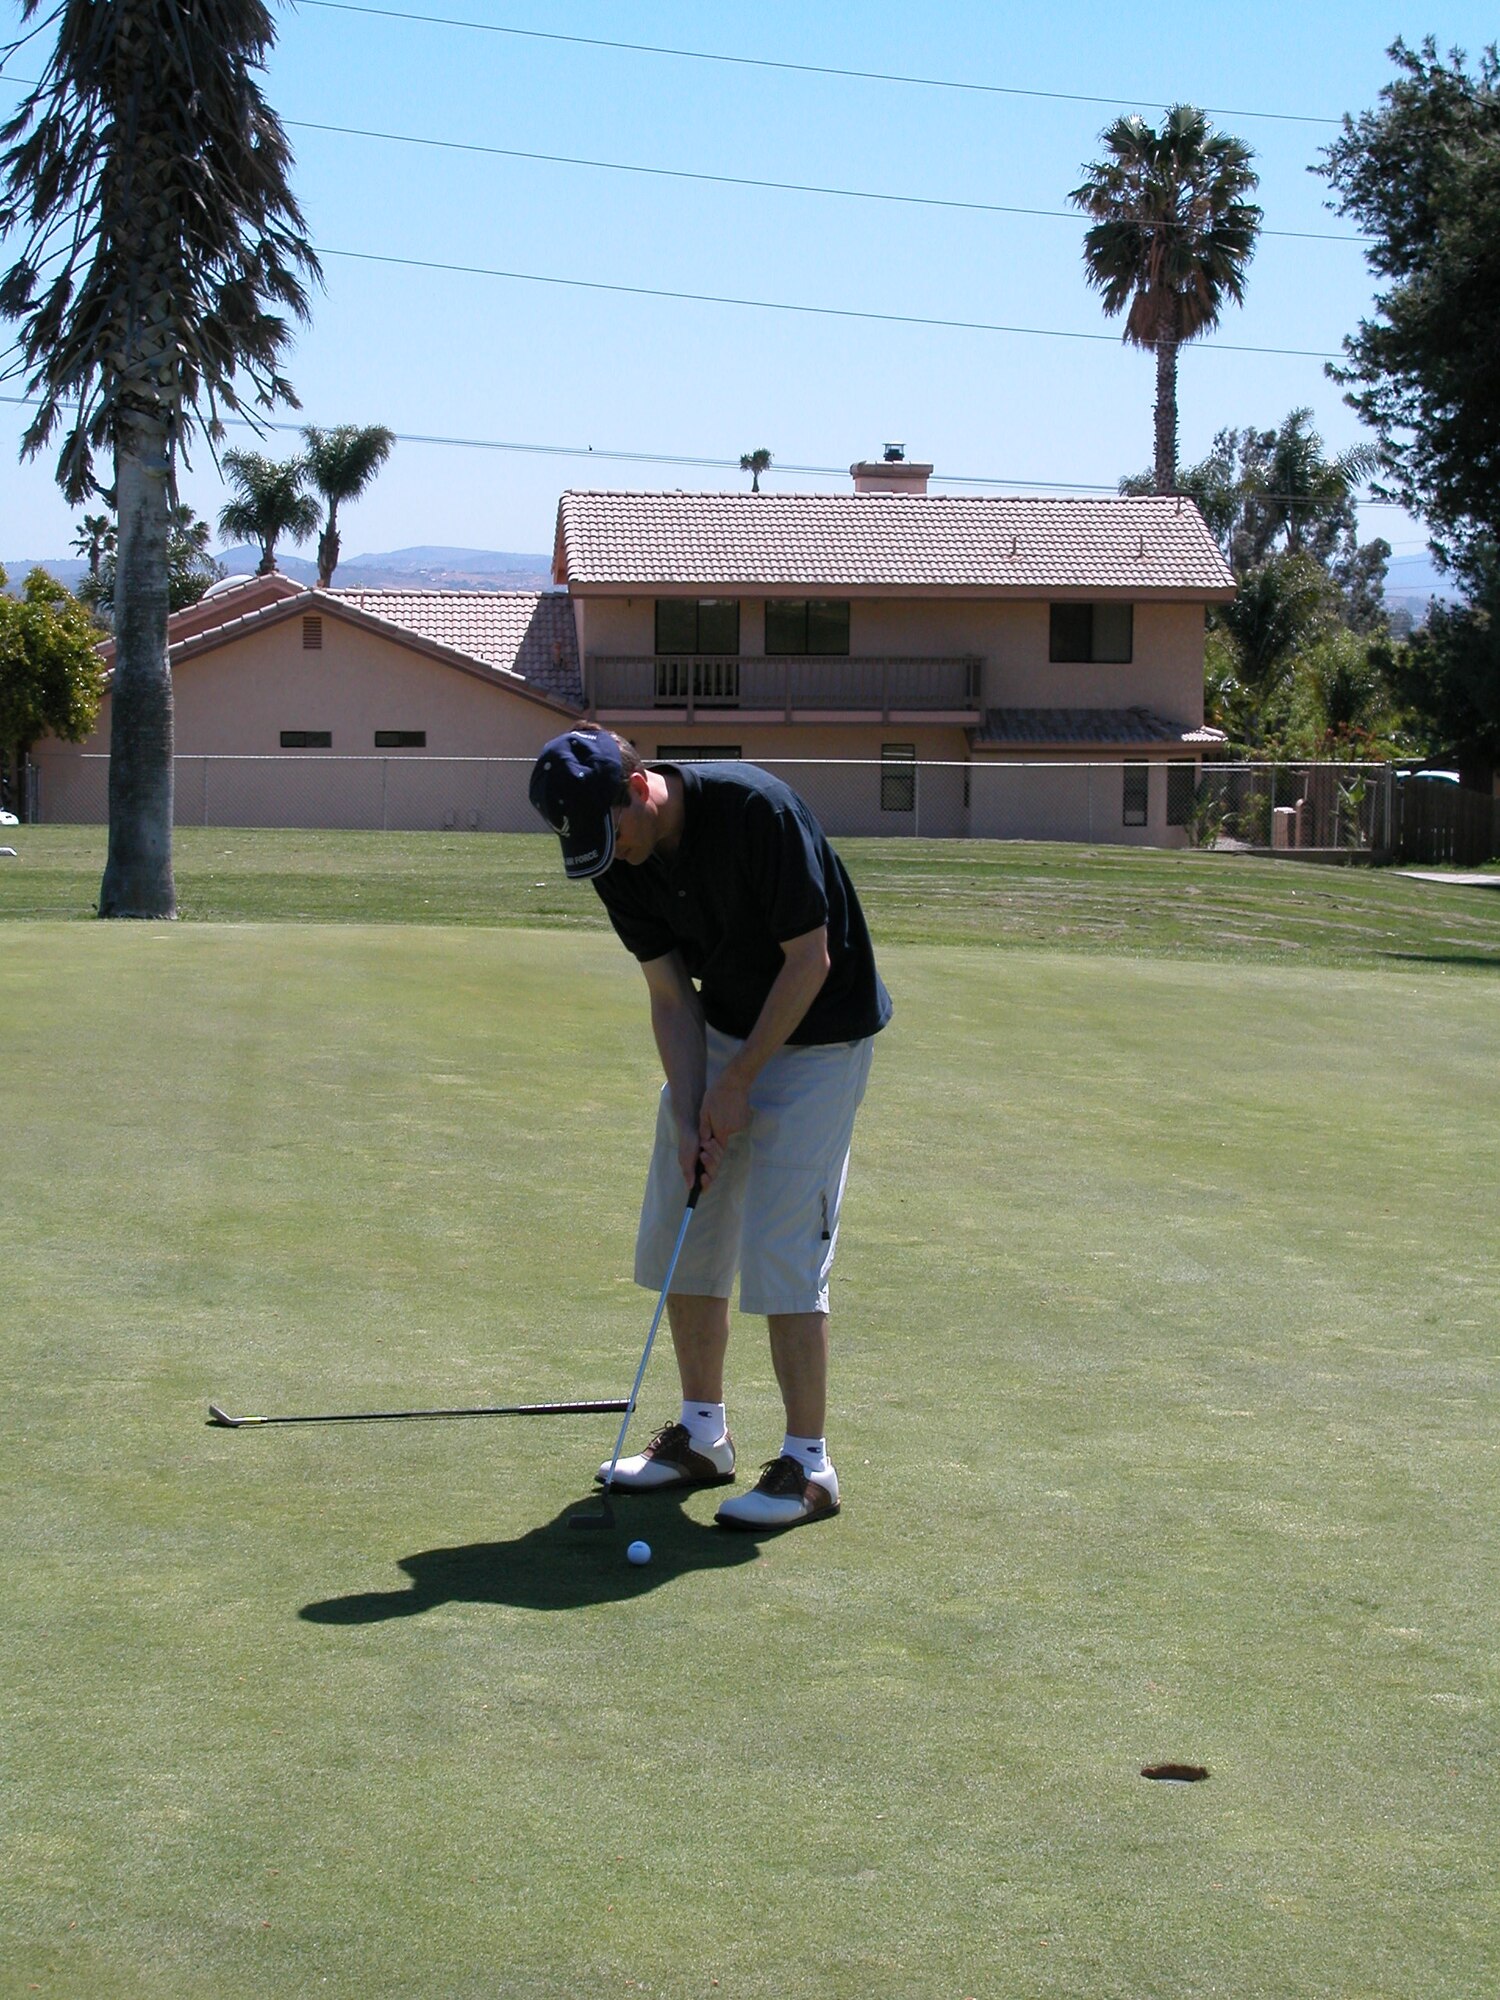 Colonel Jeff Barson, 452d AMW vice commander, concentrates on his putt. Team March golfers were hampered by a head wind at the annual Broken
Shaft golf tournament where the civilians of the community won the team
trophy by only 50 strokes. The annual golf game, organized by the Greater
Riverside Chambers of Commerce for more than 30 years, saw about 40
players take the course. This year’s tournament again was played at Jurupa Golf
Course. Awards were presented after the game for closest to the pin, low net
score, low gross score and best ball net. The players enjoyed dinner in the
club house as well as a good amount of teasing when the broken shaft trophy
was presented.

Top Teams for Best Balls Net
1st Place: Mike Bowery, Hap Heublein, Tim Plein, Elaine Plein
2nd Place: Don Brower, Hal Austin, Jeff Barnson, Steve Barnett
Closest to the Pin# 3: Dana Hessheim
Closest to the Pin# 18: Chuck Manley
1st Low Gross: Phil Rizzo (25)
2nd Low Gross: Mike Lanahan (80)
1st Low Net: Cam LeBlanc (63)
2nd Low Net: Bill Kimble (66)
Winners of the Trophy: Team MAC 1349
Winners of the Broken Shaft: Team March 1399
(U.S. Air Force photo by Maj. Don Traud)